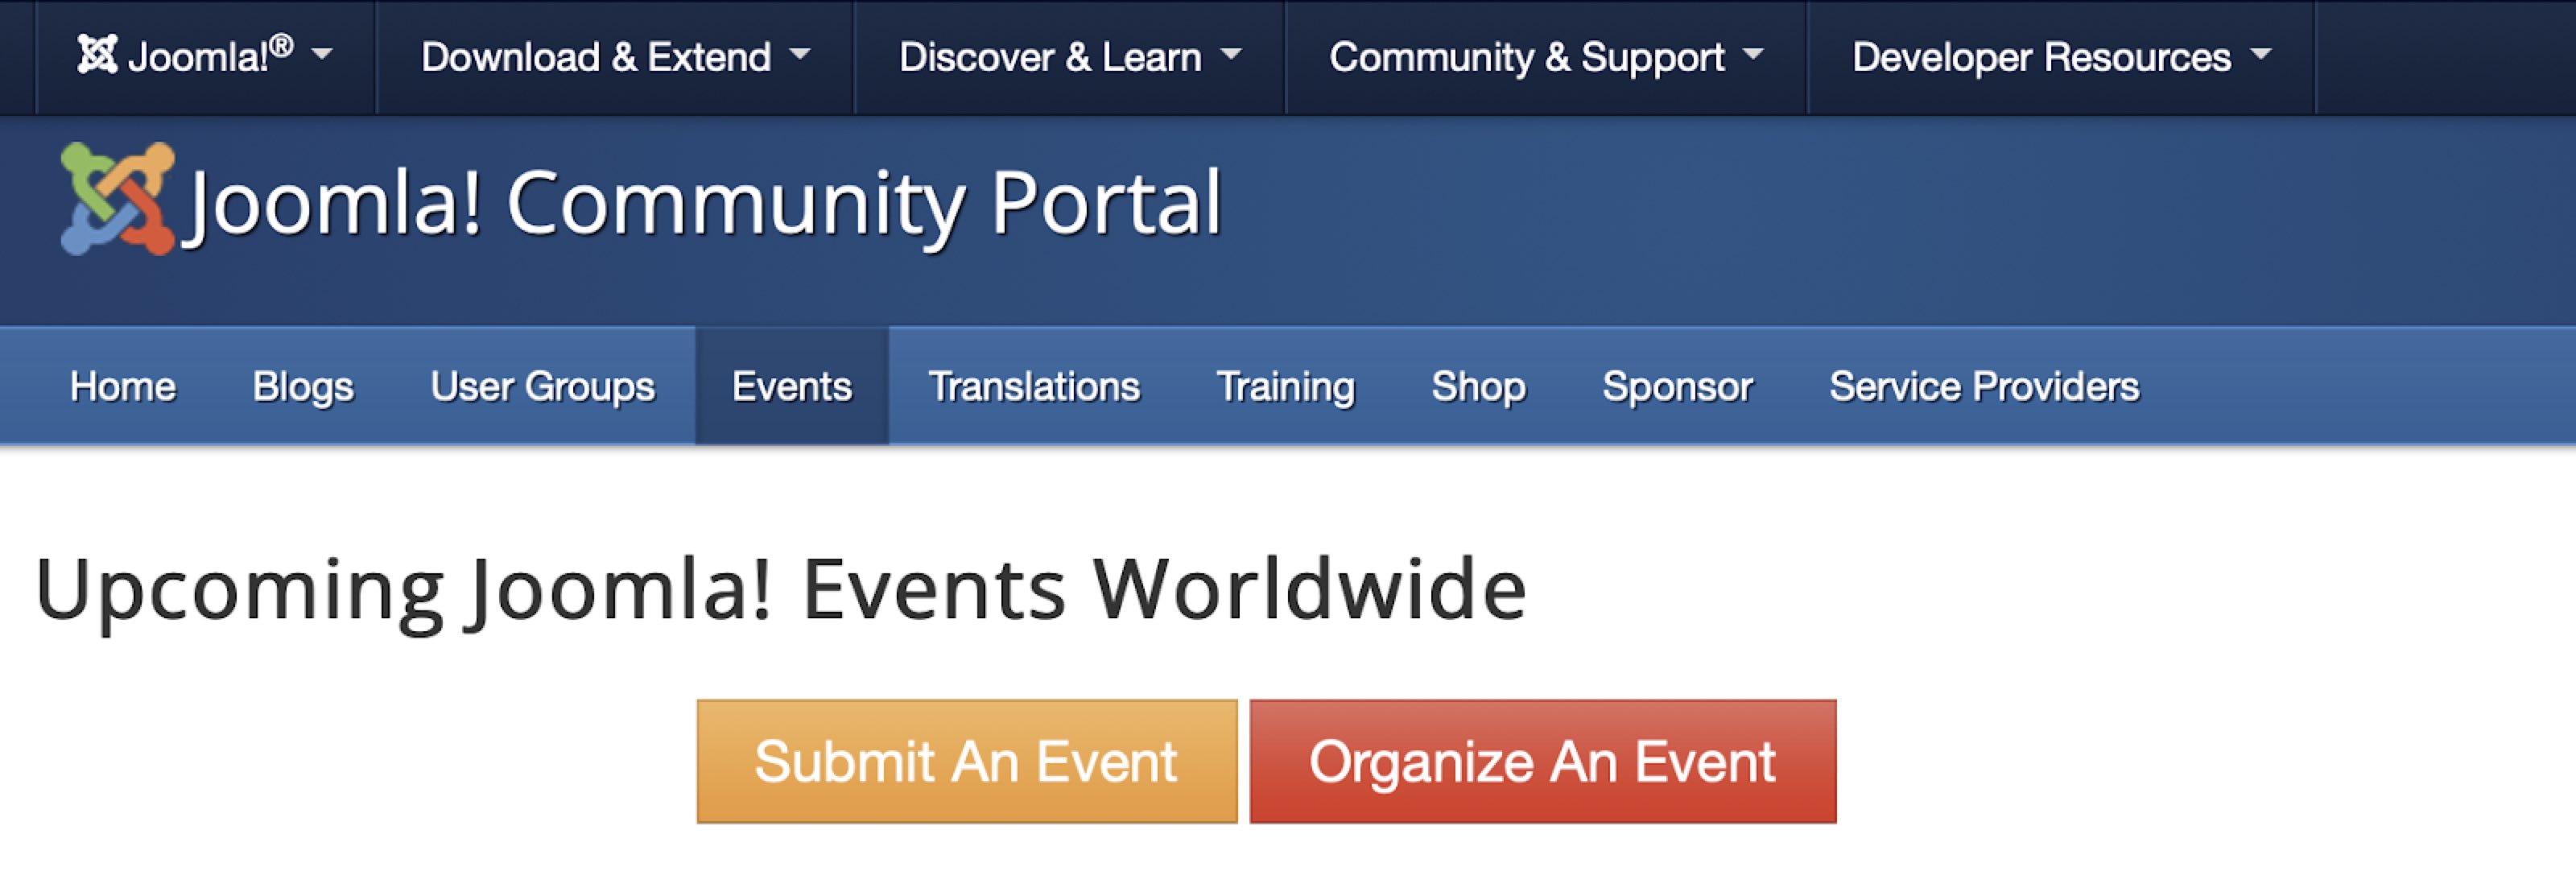 submit event on community portal